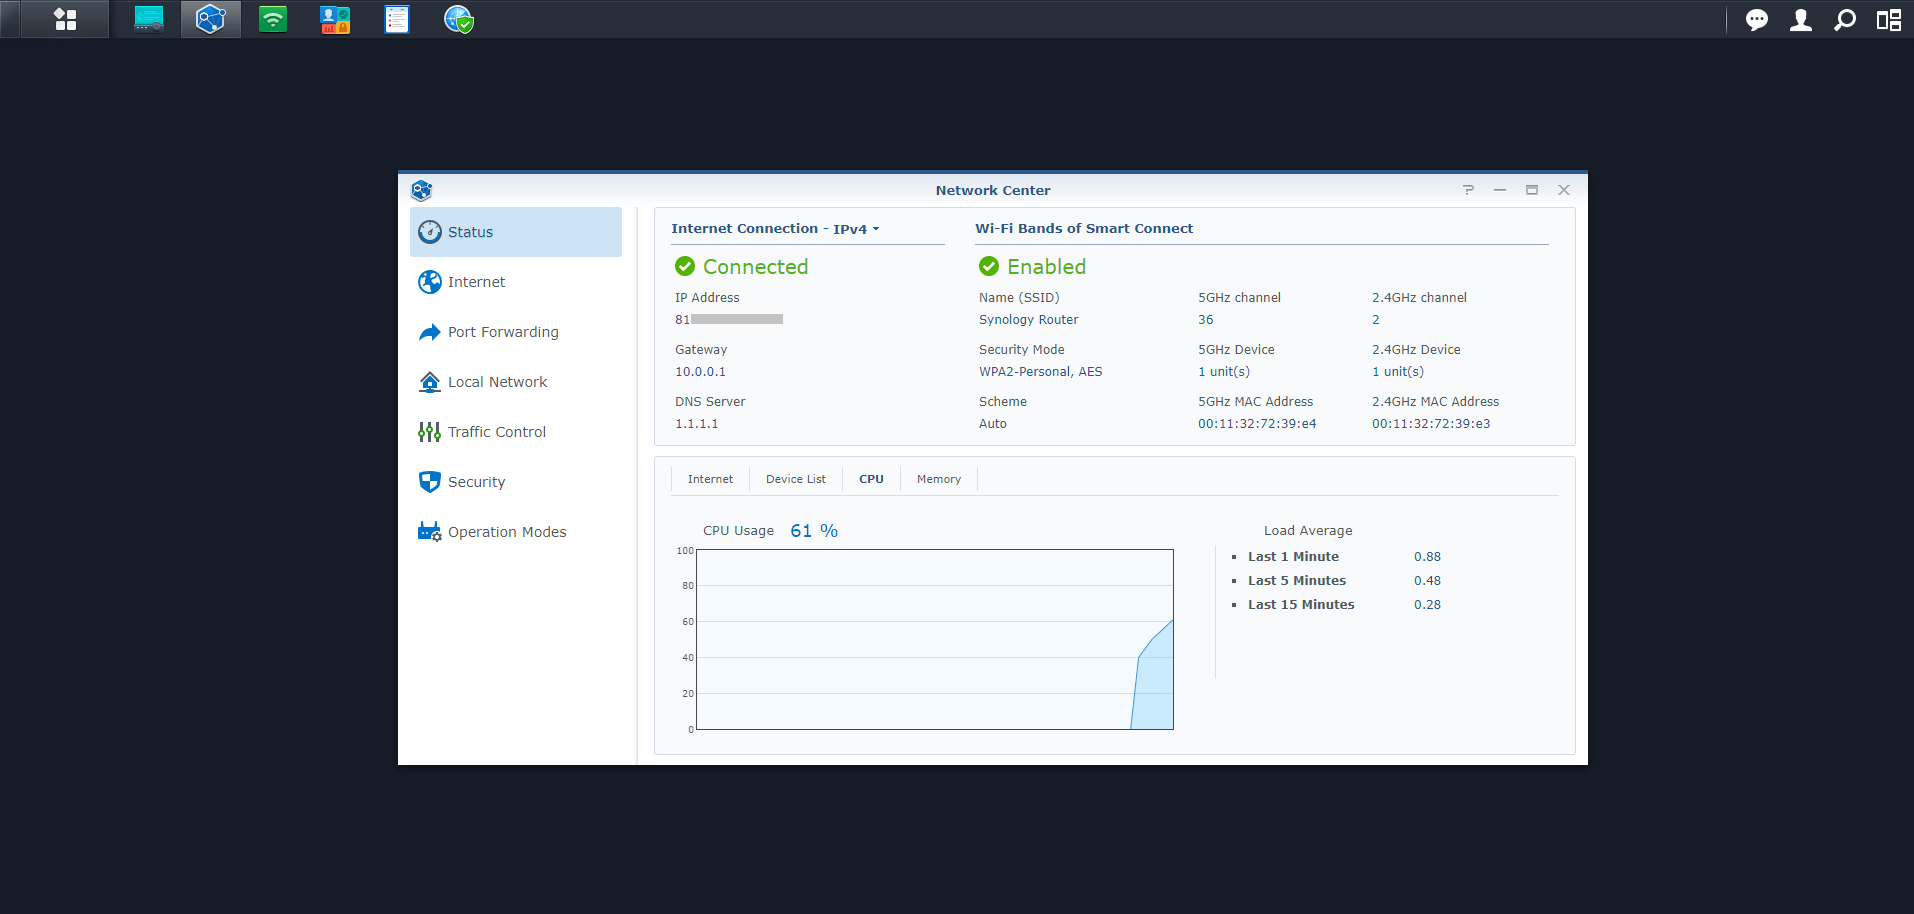 Synology RT2600ac Network Center